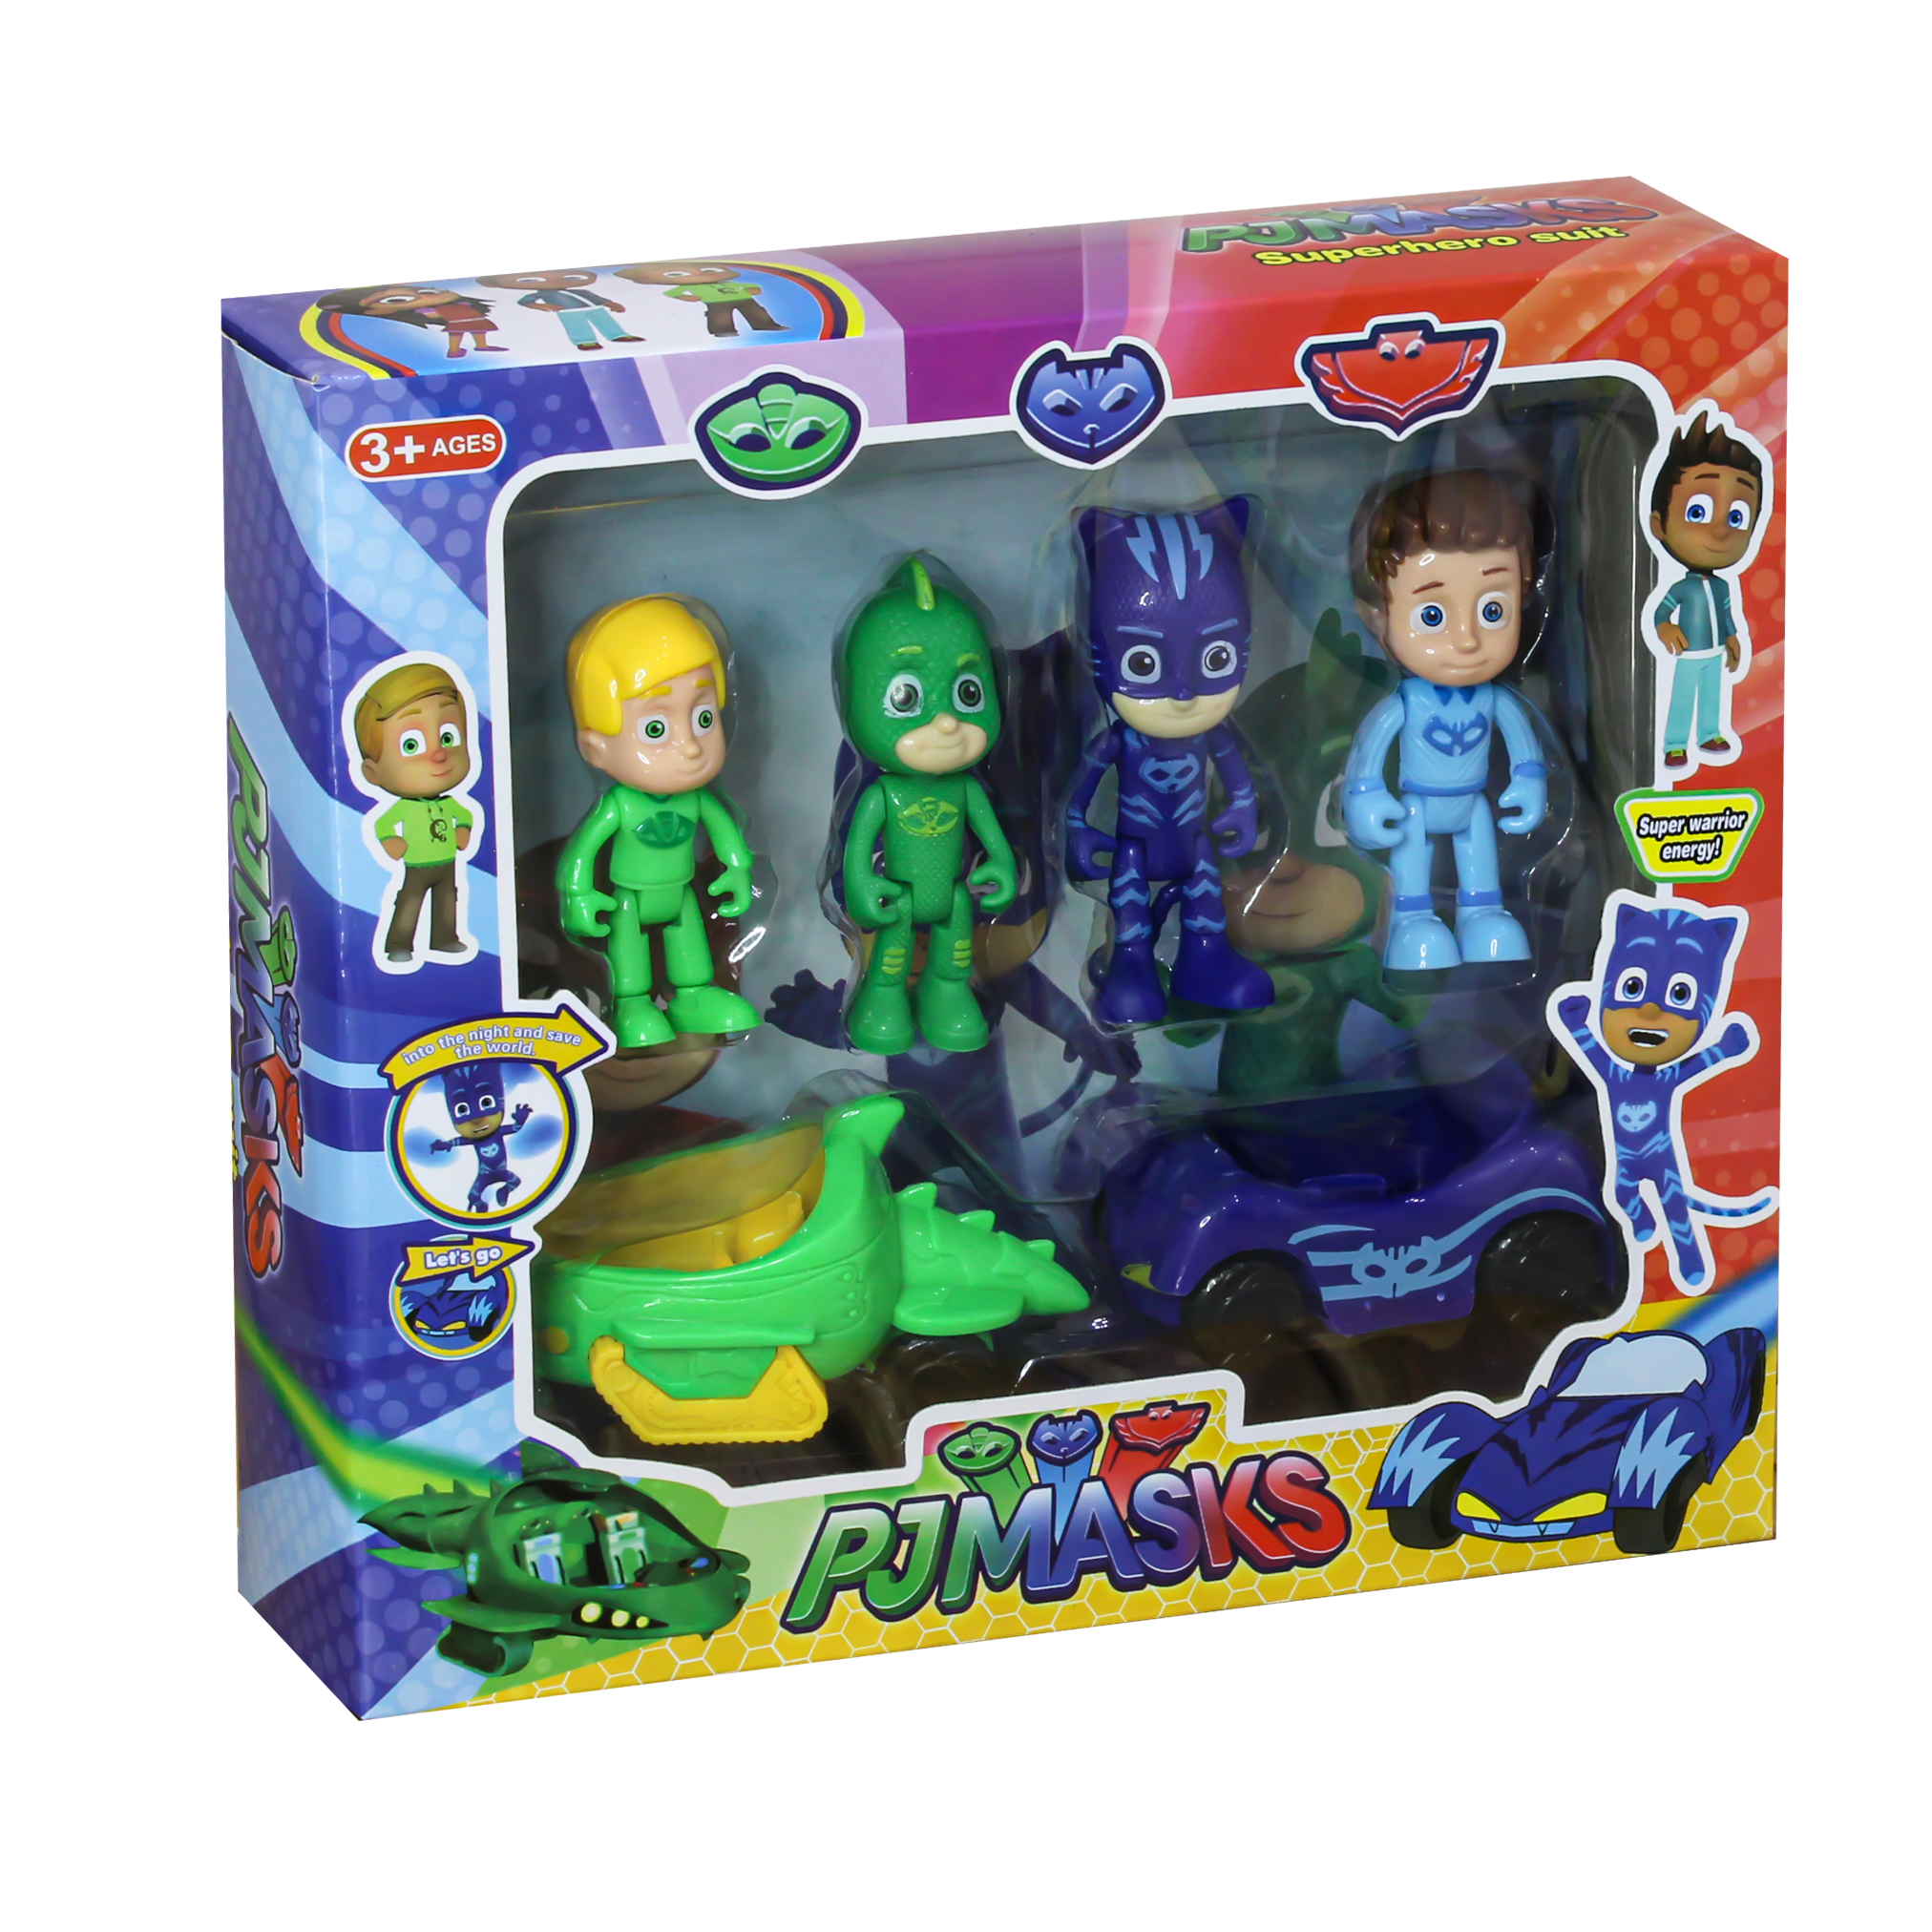 PJ Masks 2 Action Figures Play Set With 2 Cars - Green & Blue